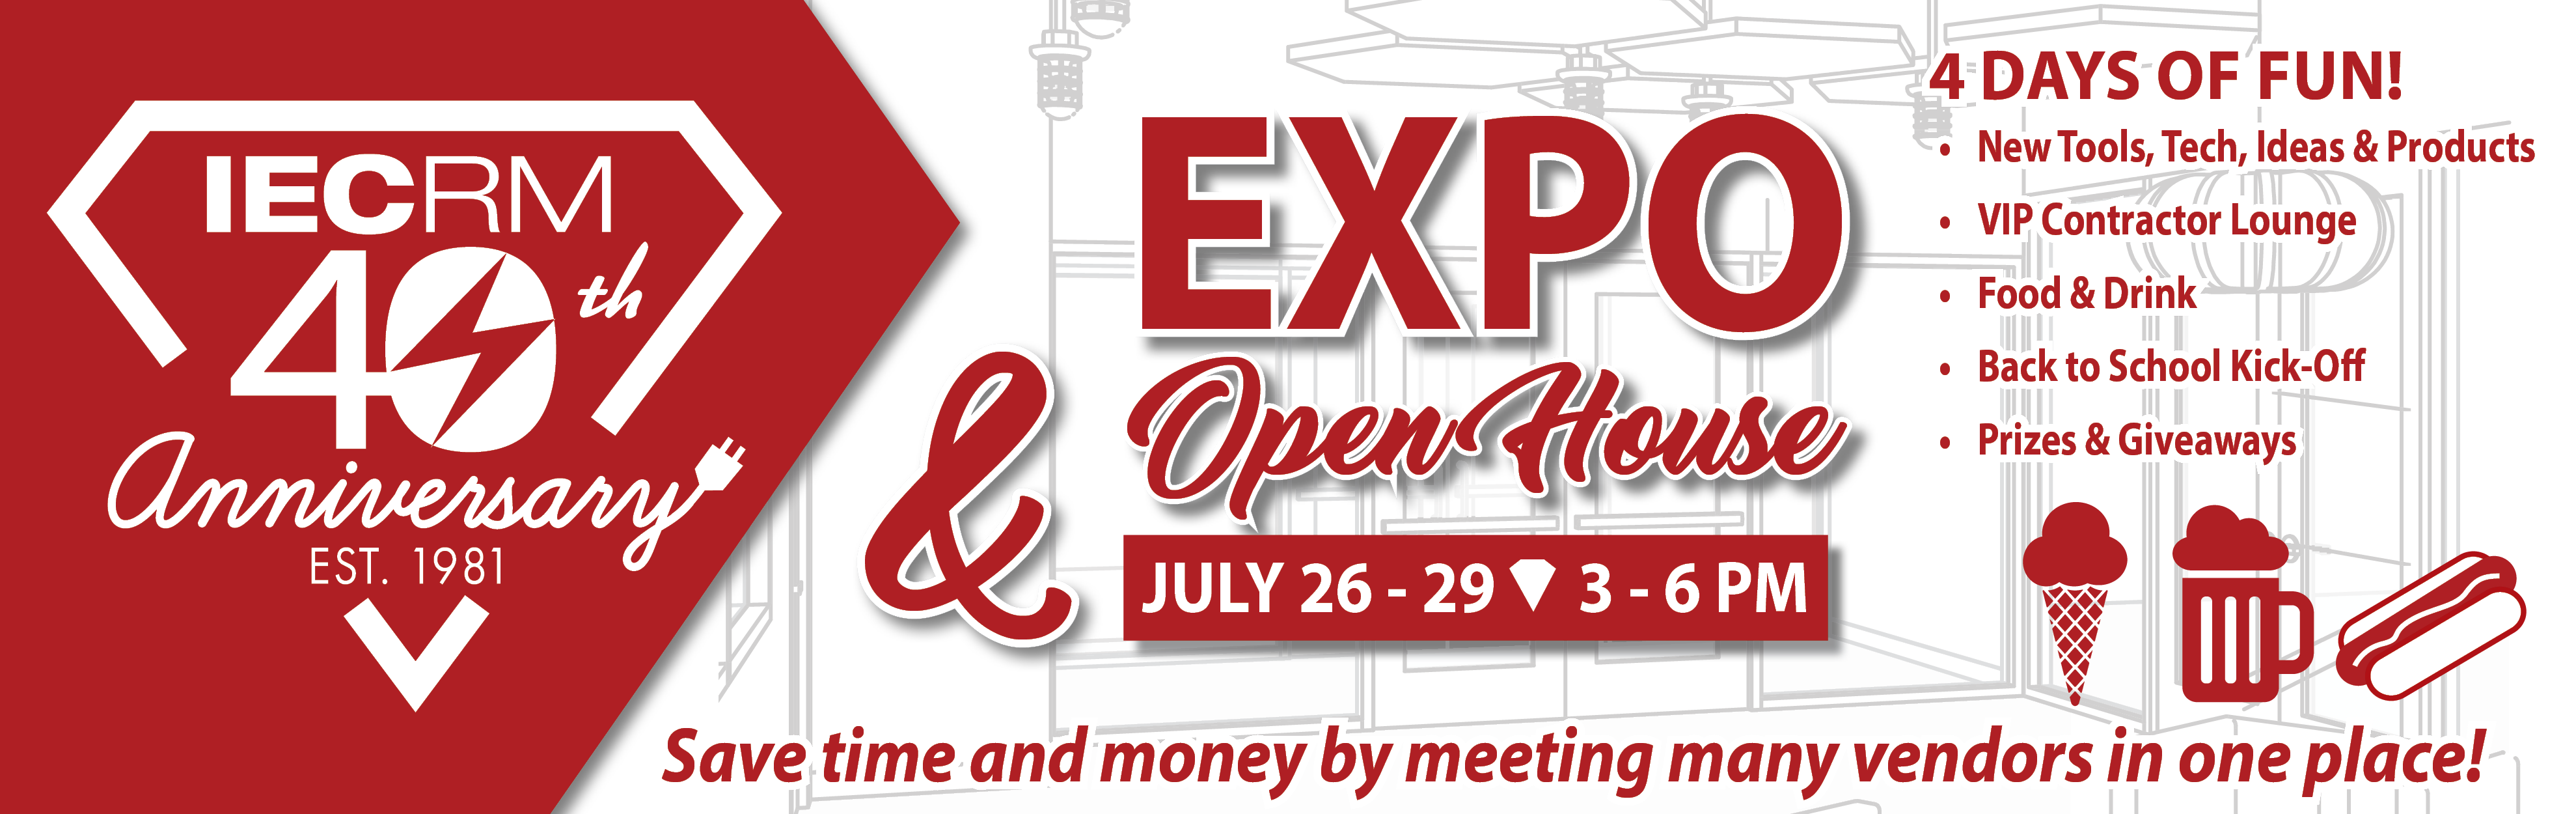 40th Anniversary Party, Expo & Open House Sponsorship